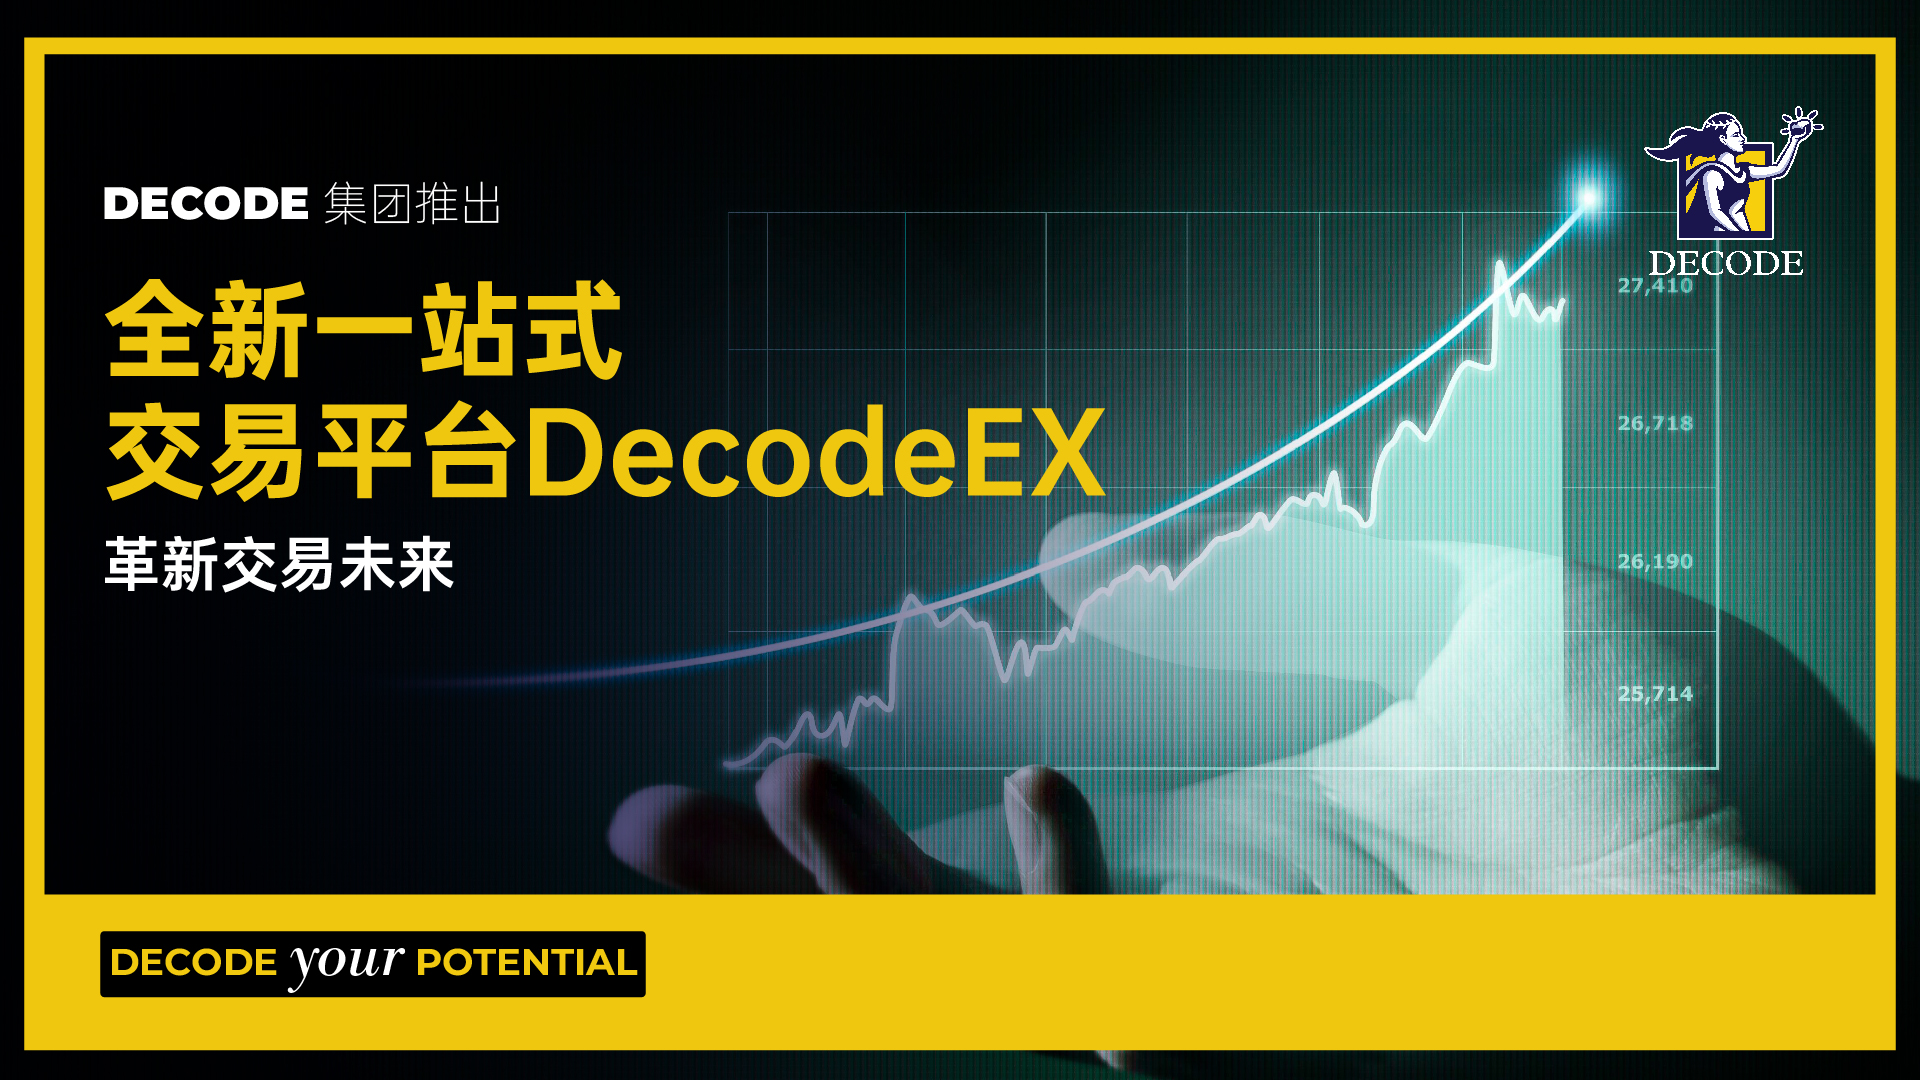 Decode Global Introduces the Brand-new All-in-One Trading Platform: Revolutionizing the Future of Trading